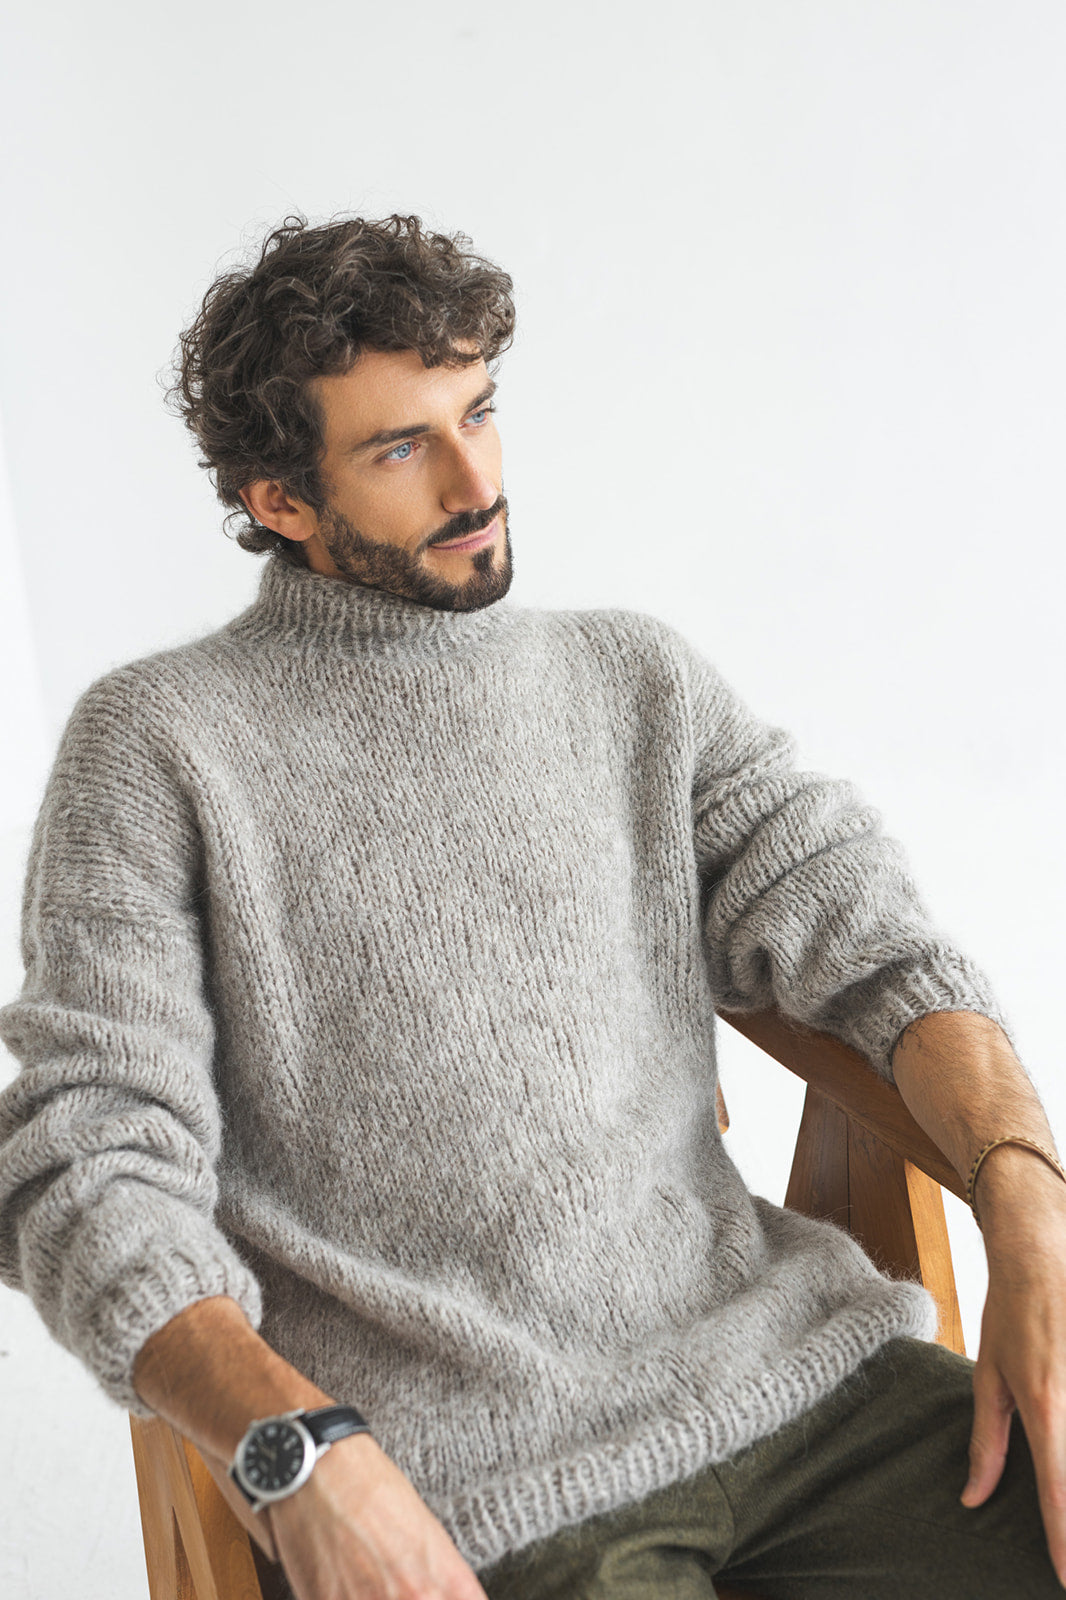 Chunky knit light gray alpaca wool sweater for men, grey cable knitted men's jumper, handmade thick winter minimalist pullover, gift for man